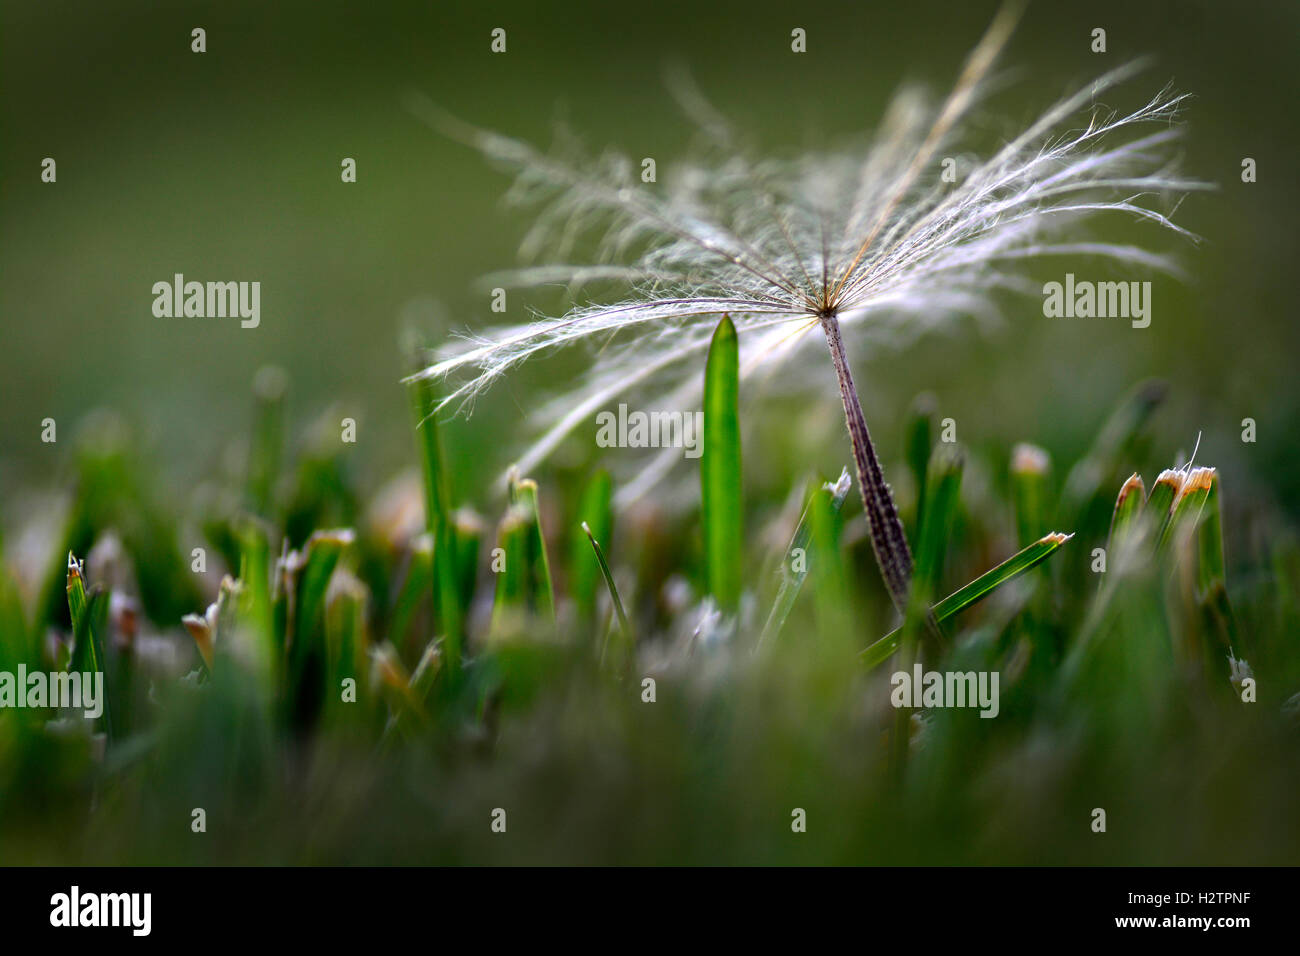 Dandelion seed in a yard or field green grass growing weeds Stock Photo